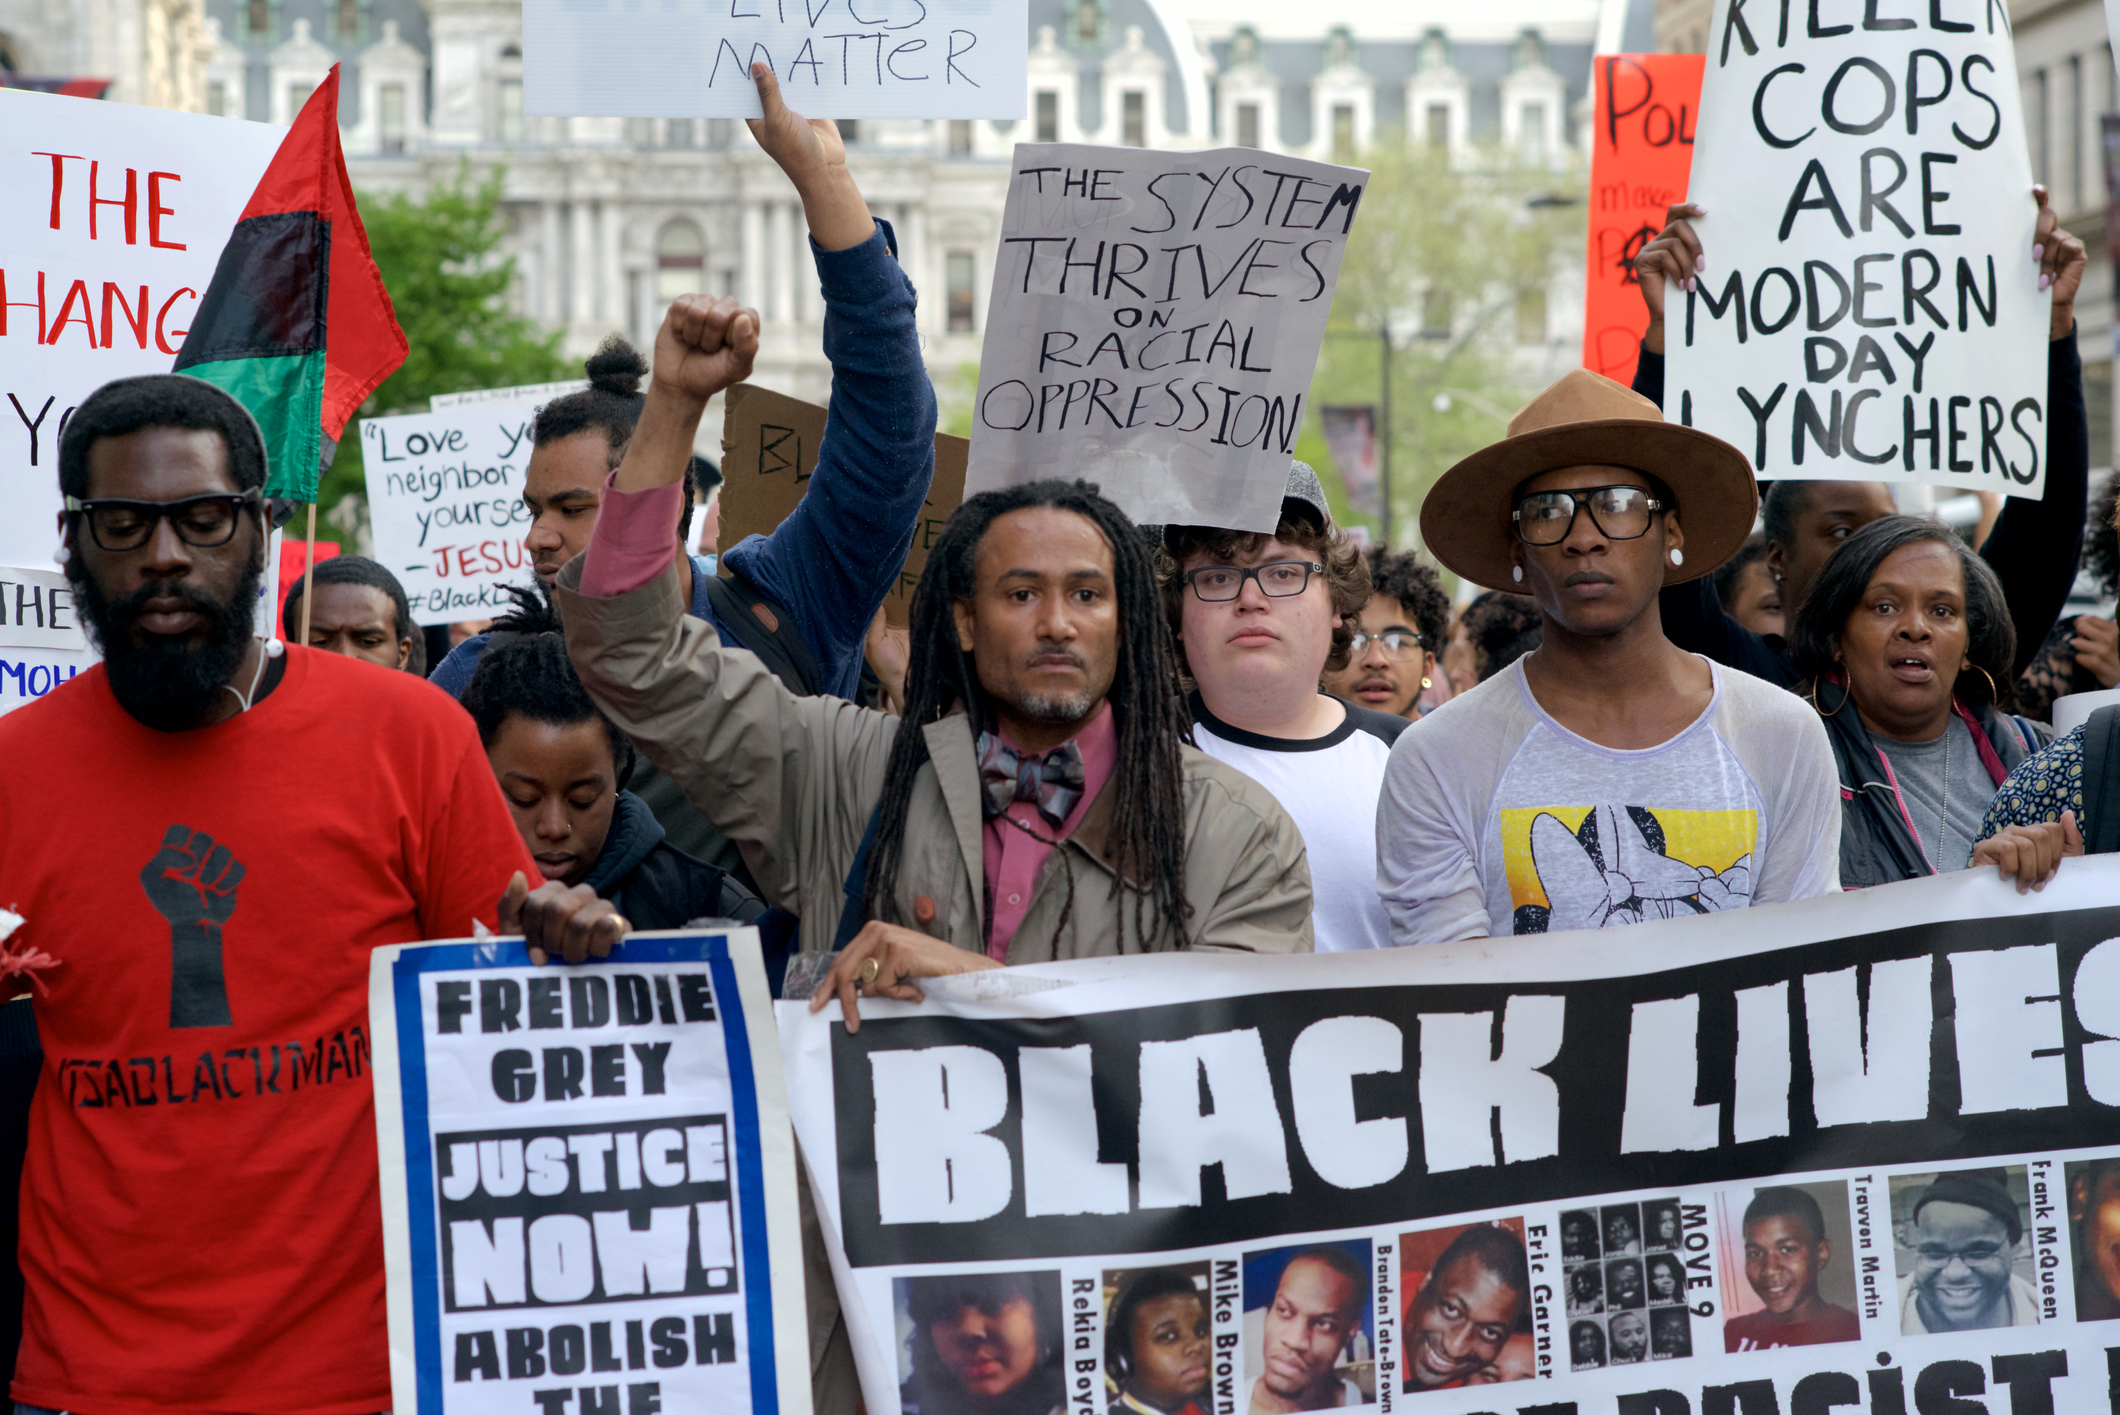 Black Lives Matter March and Protest in Philadelphia, PA